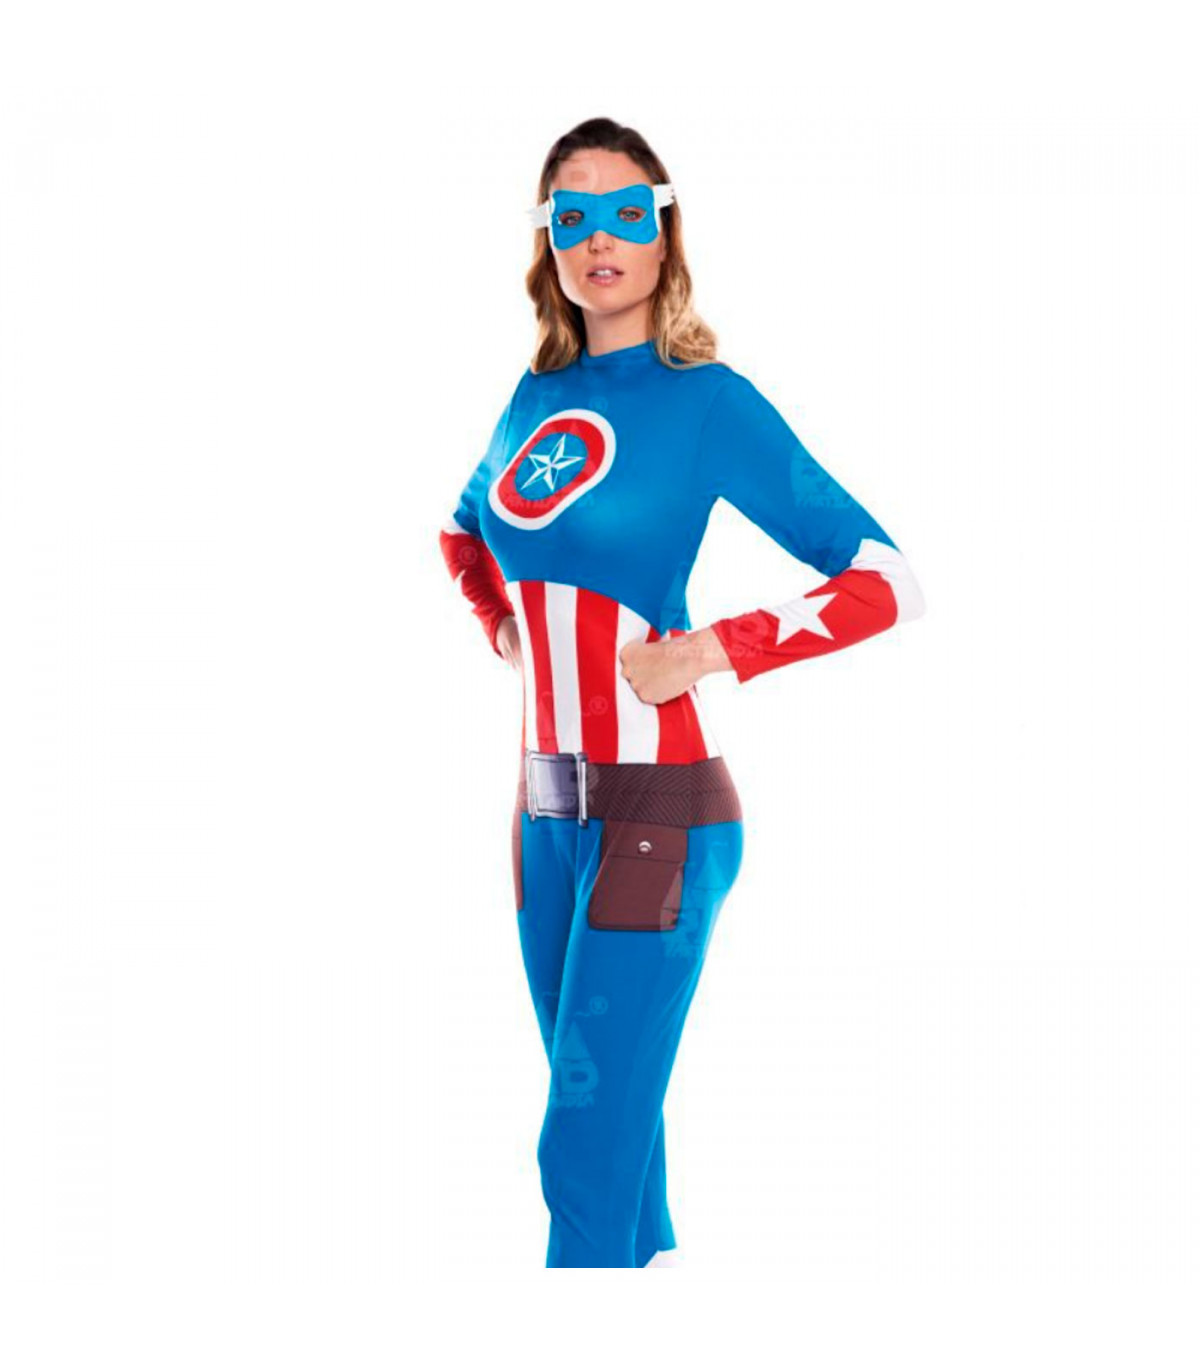 female dc costumes - Google Search  Disfraz carnaval mujer, Disfraces  superheroes mujer, Disfraces para chicas